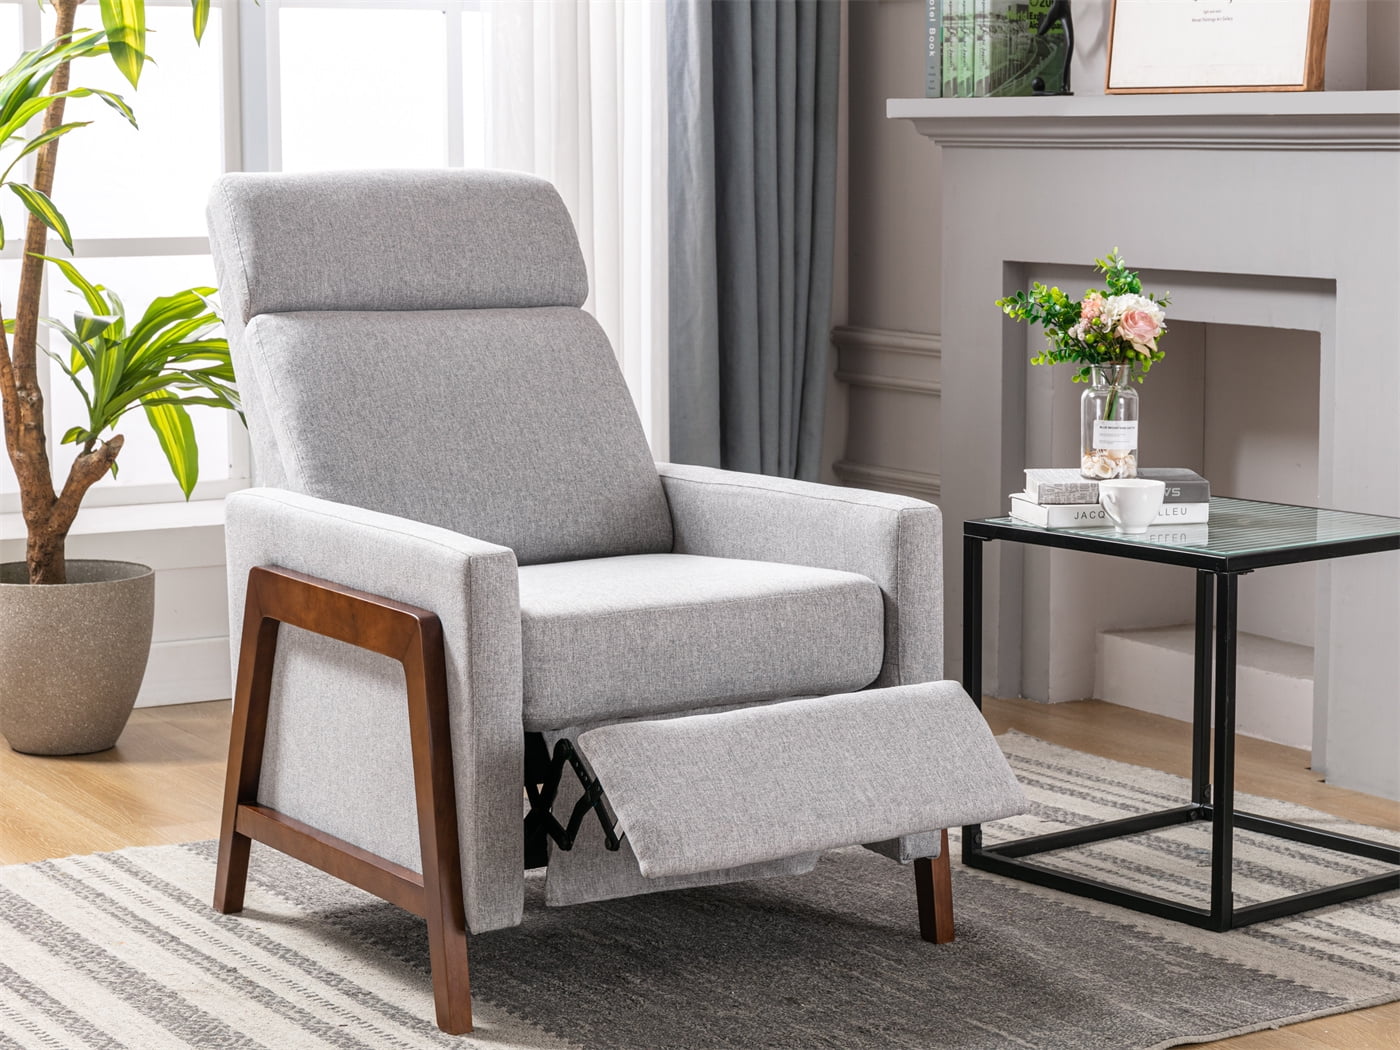 Dropship Set Of Two Wood-Framed Upholstered Recliner Chair Adjustable Home  Theater Seating With Thick Seat Cushion And Backrest Modern Living Room  Recliners; Gray to Sell Online at a Lower Price